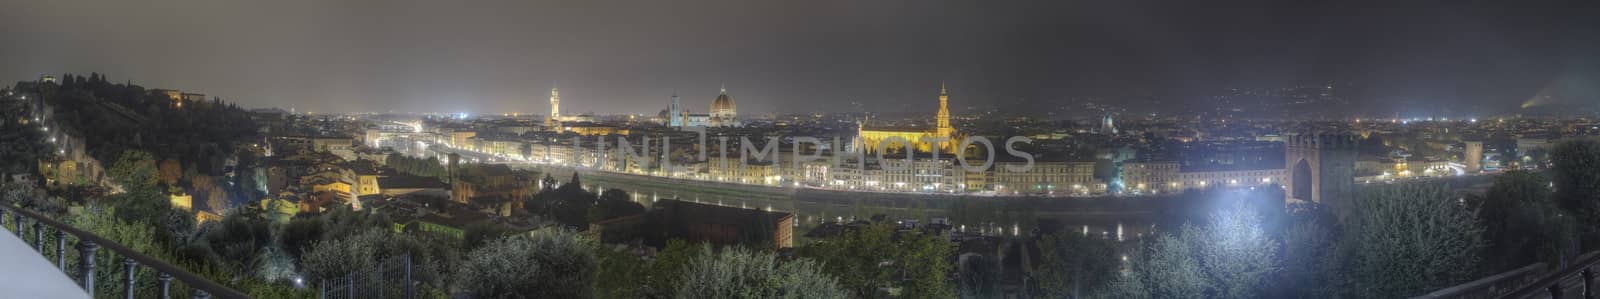 Panorama of Florence by mot1963